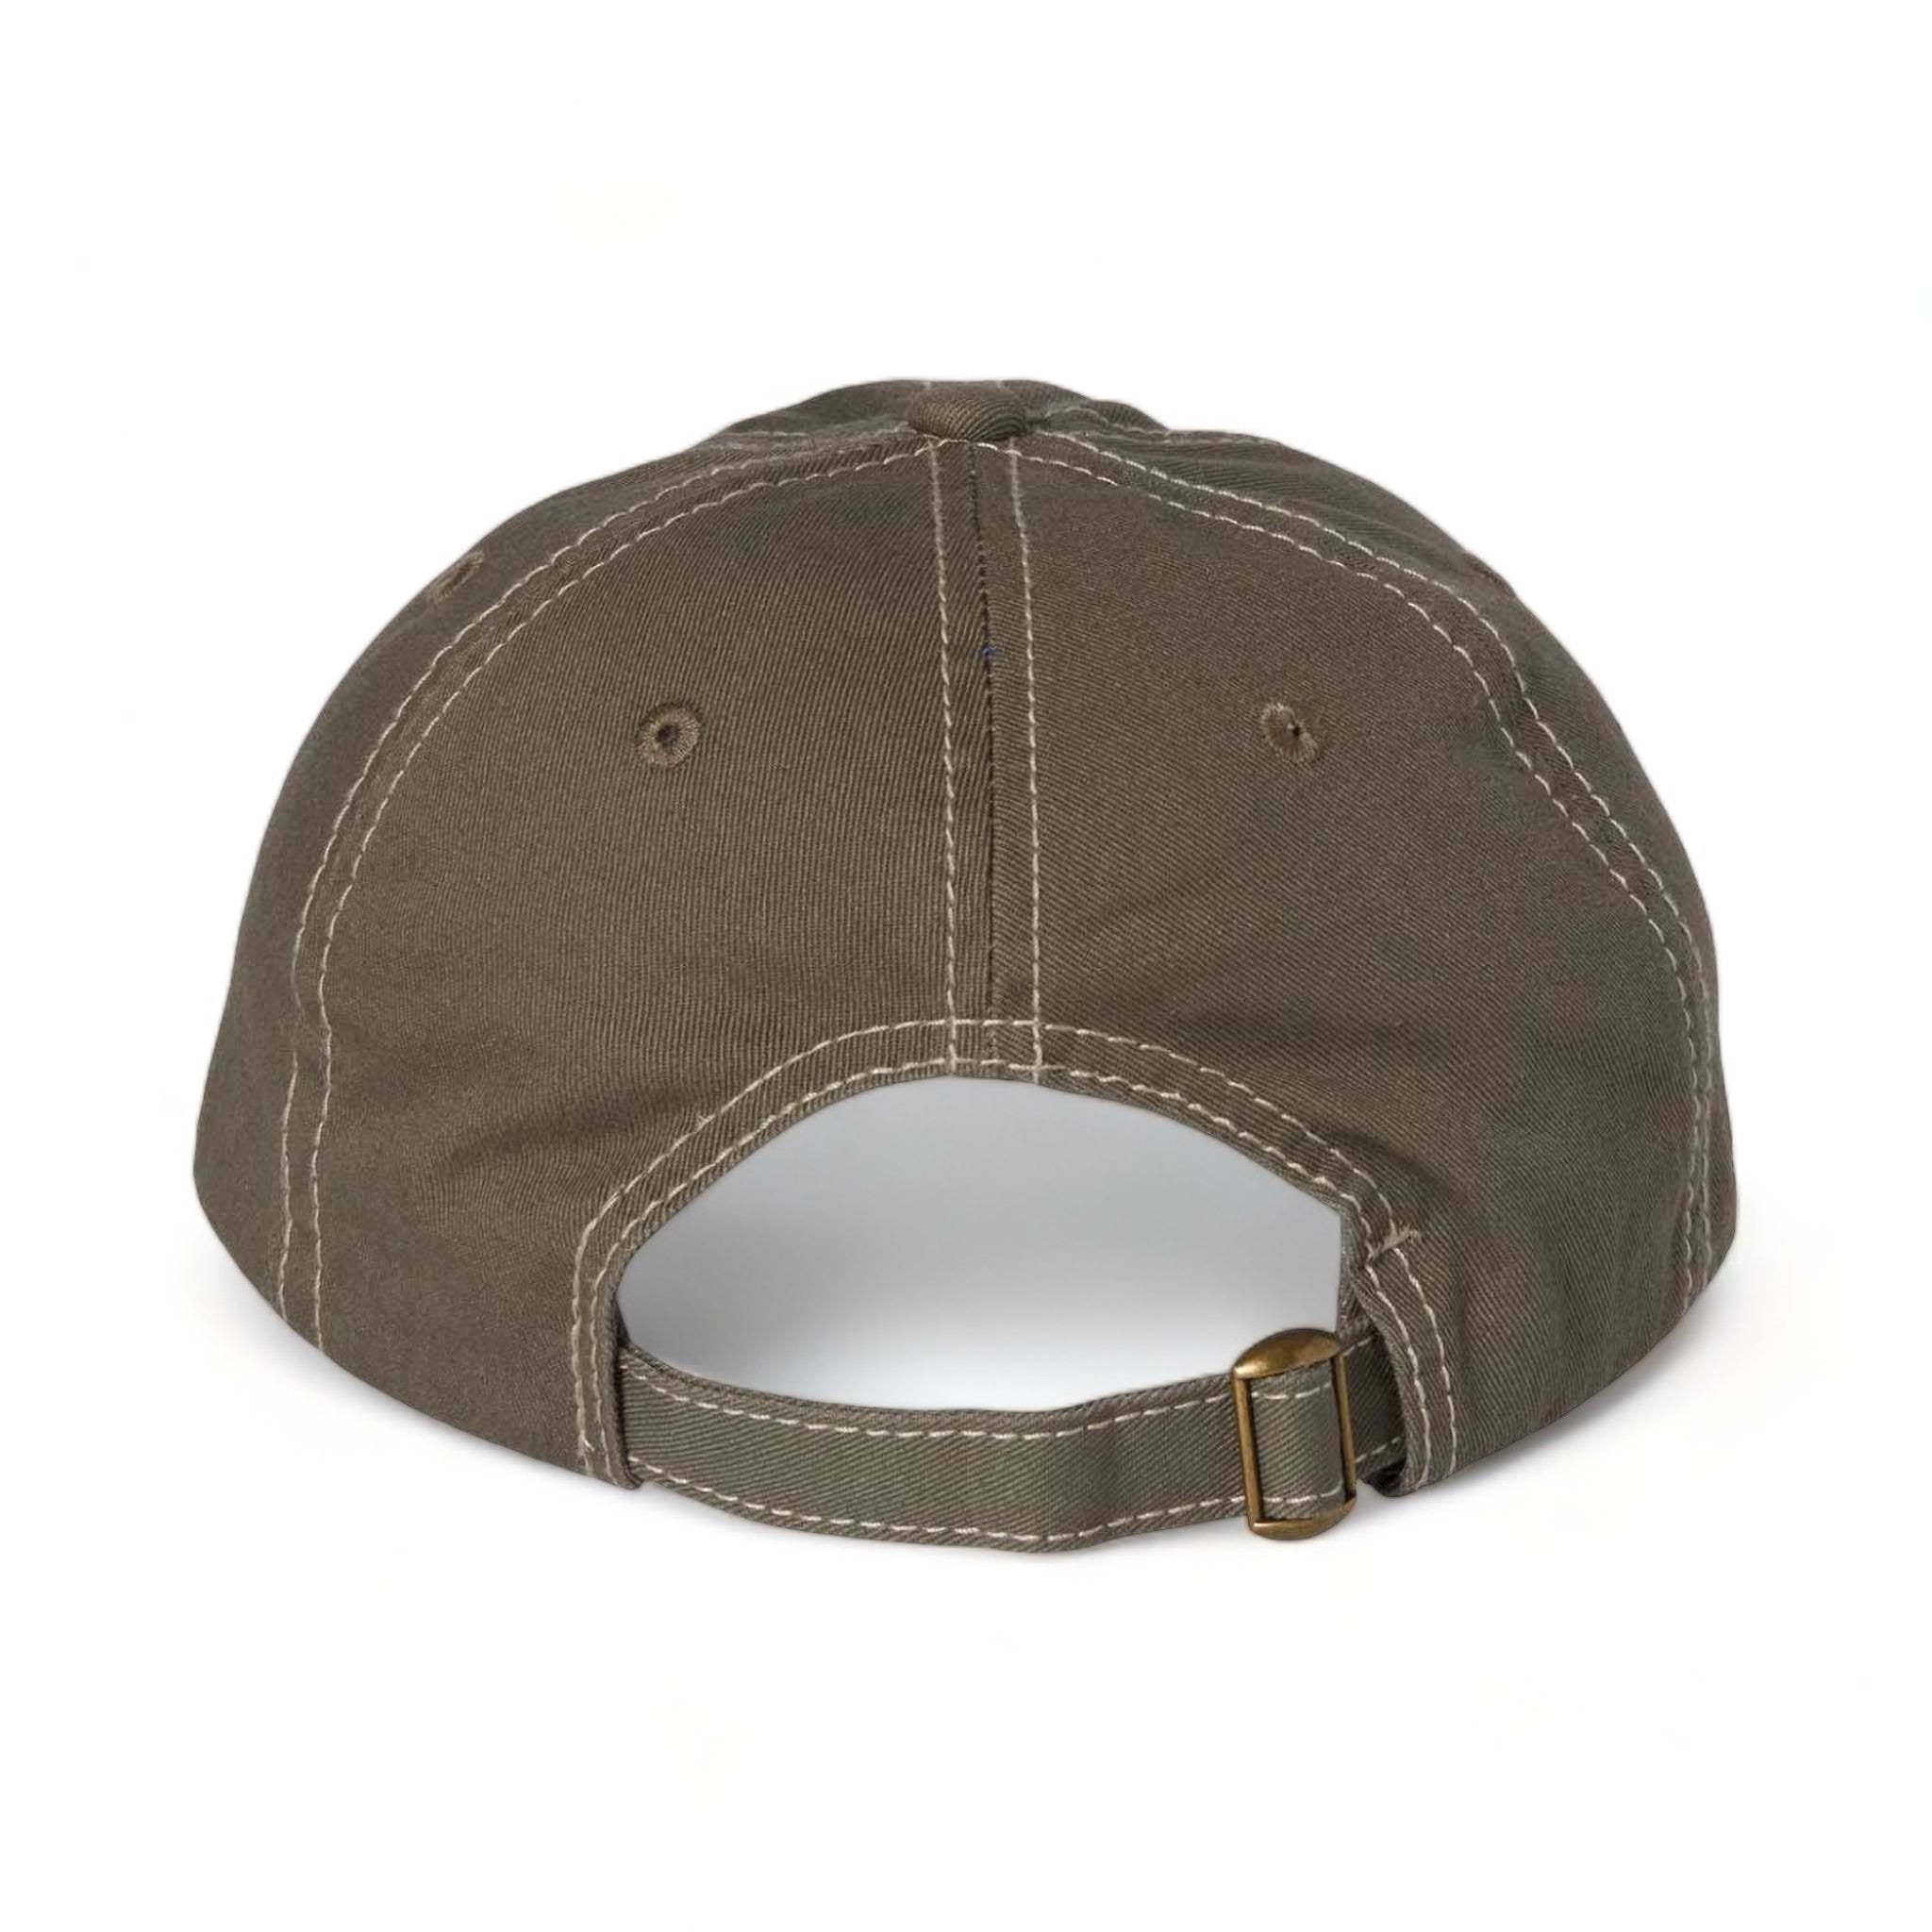 Back view of Valucap VC300A custom hat in olive and stone stitch